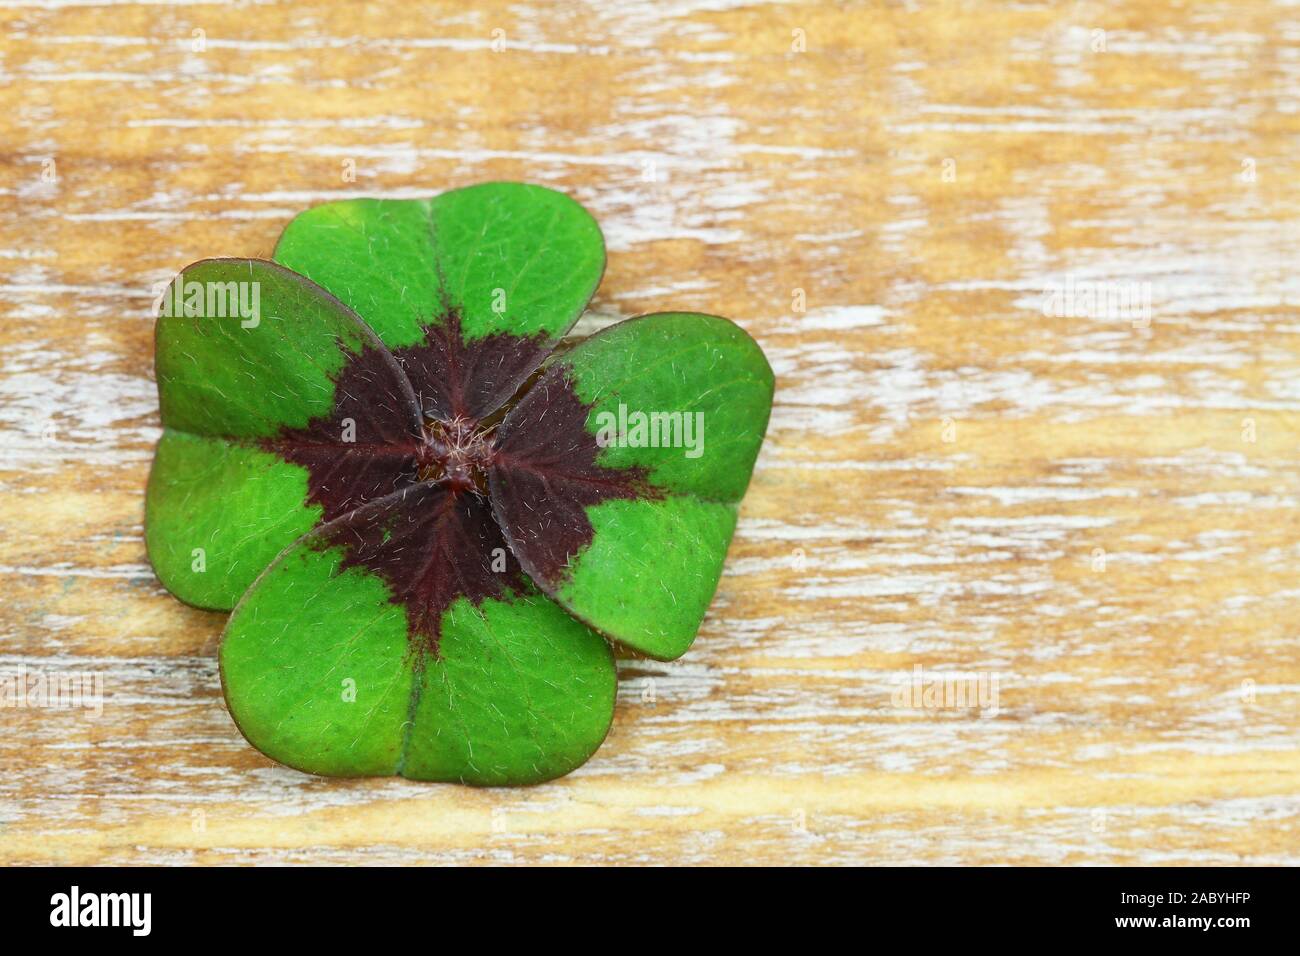 Four-leaf clover on wooden surface with copy space Stock Photo